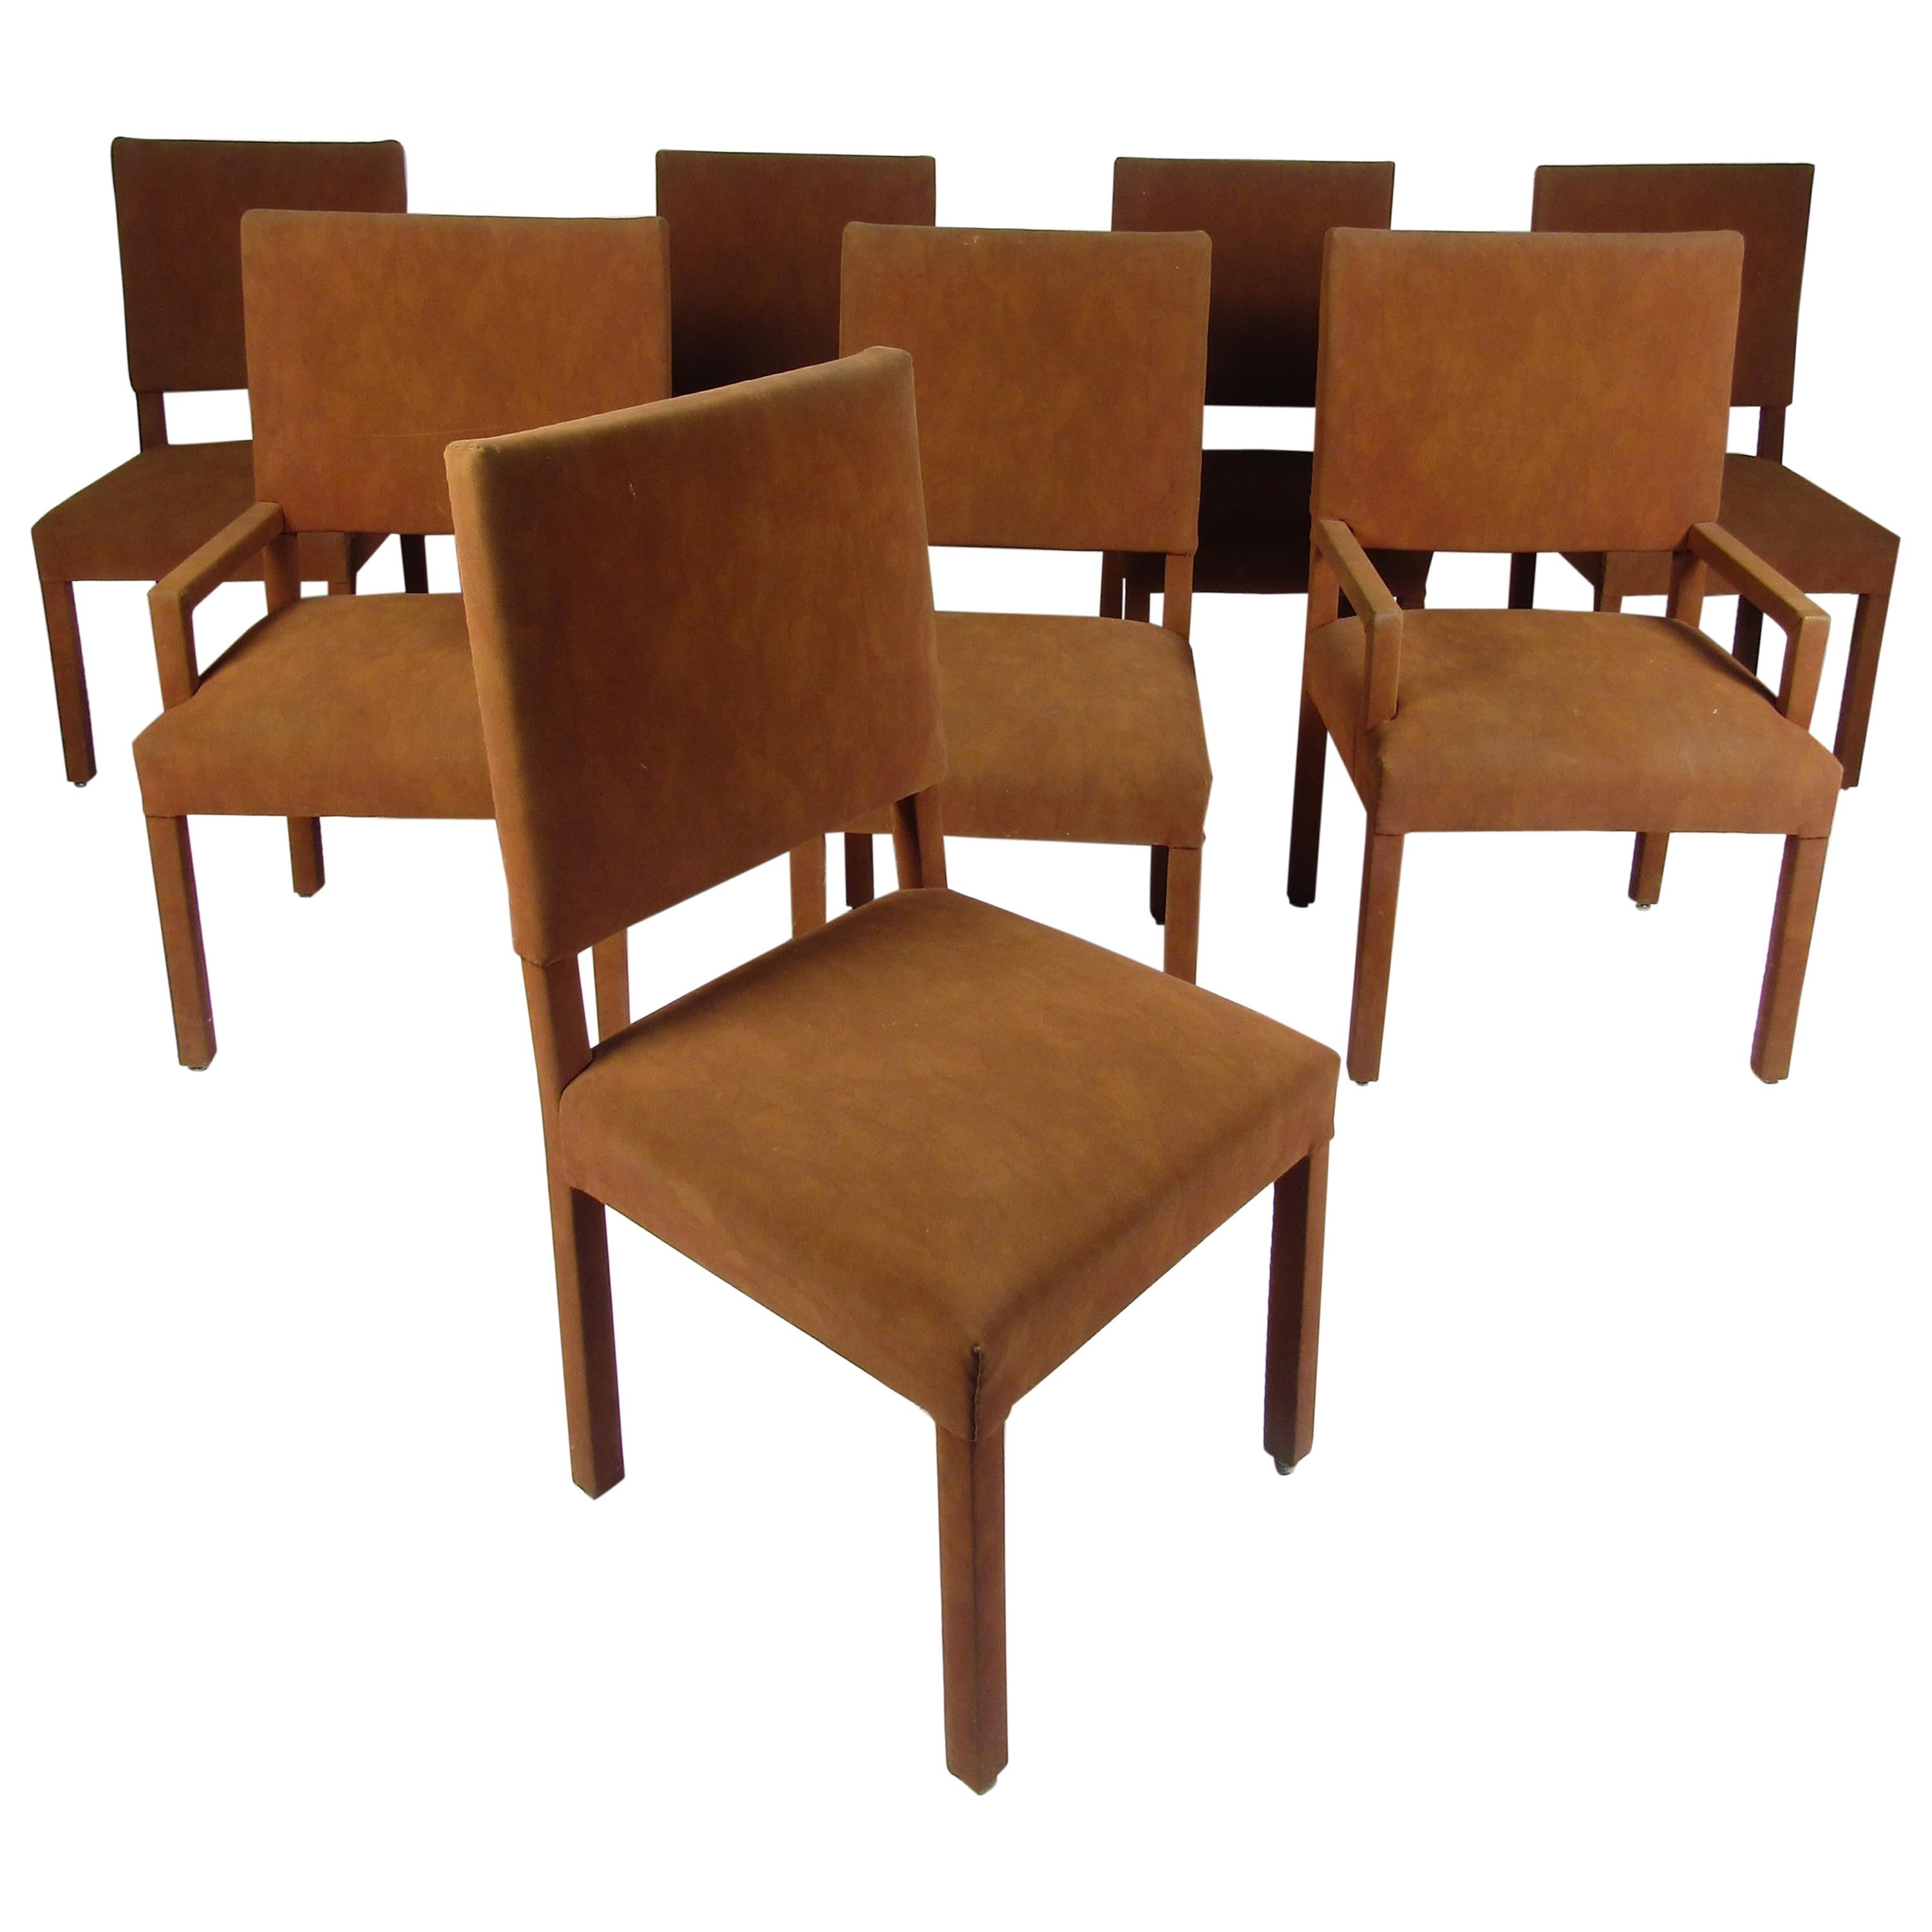 Set of Eight Mid-Century Modern Suede Dining Chairs